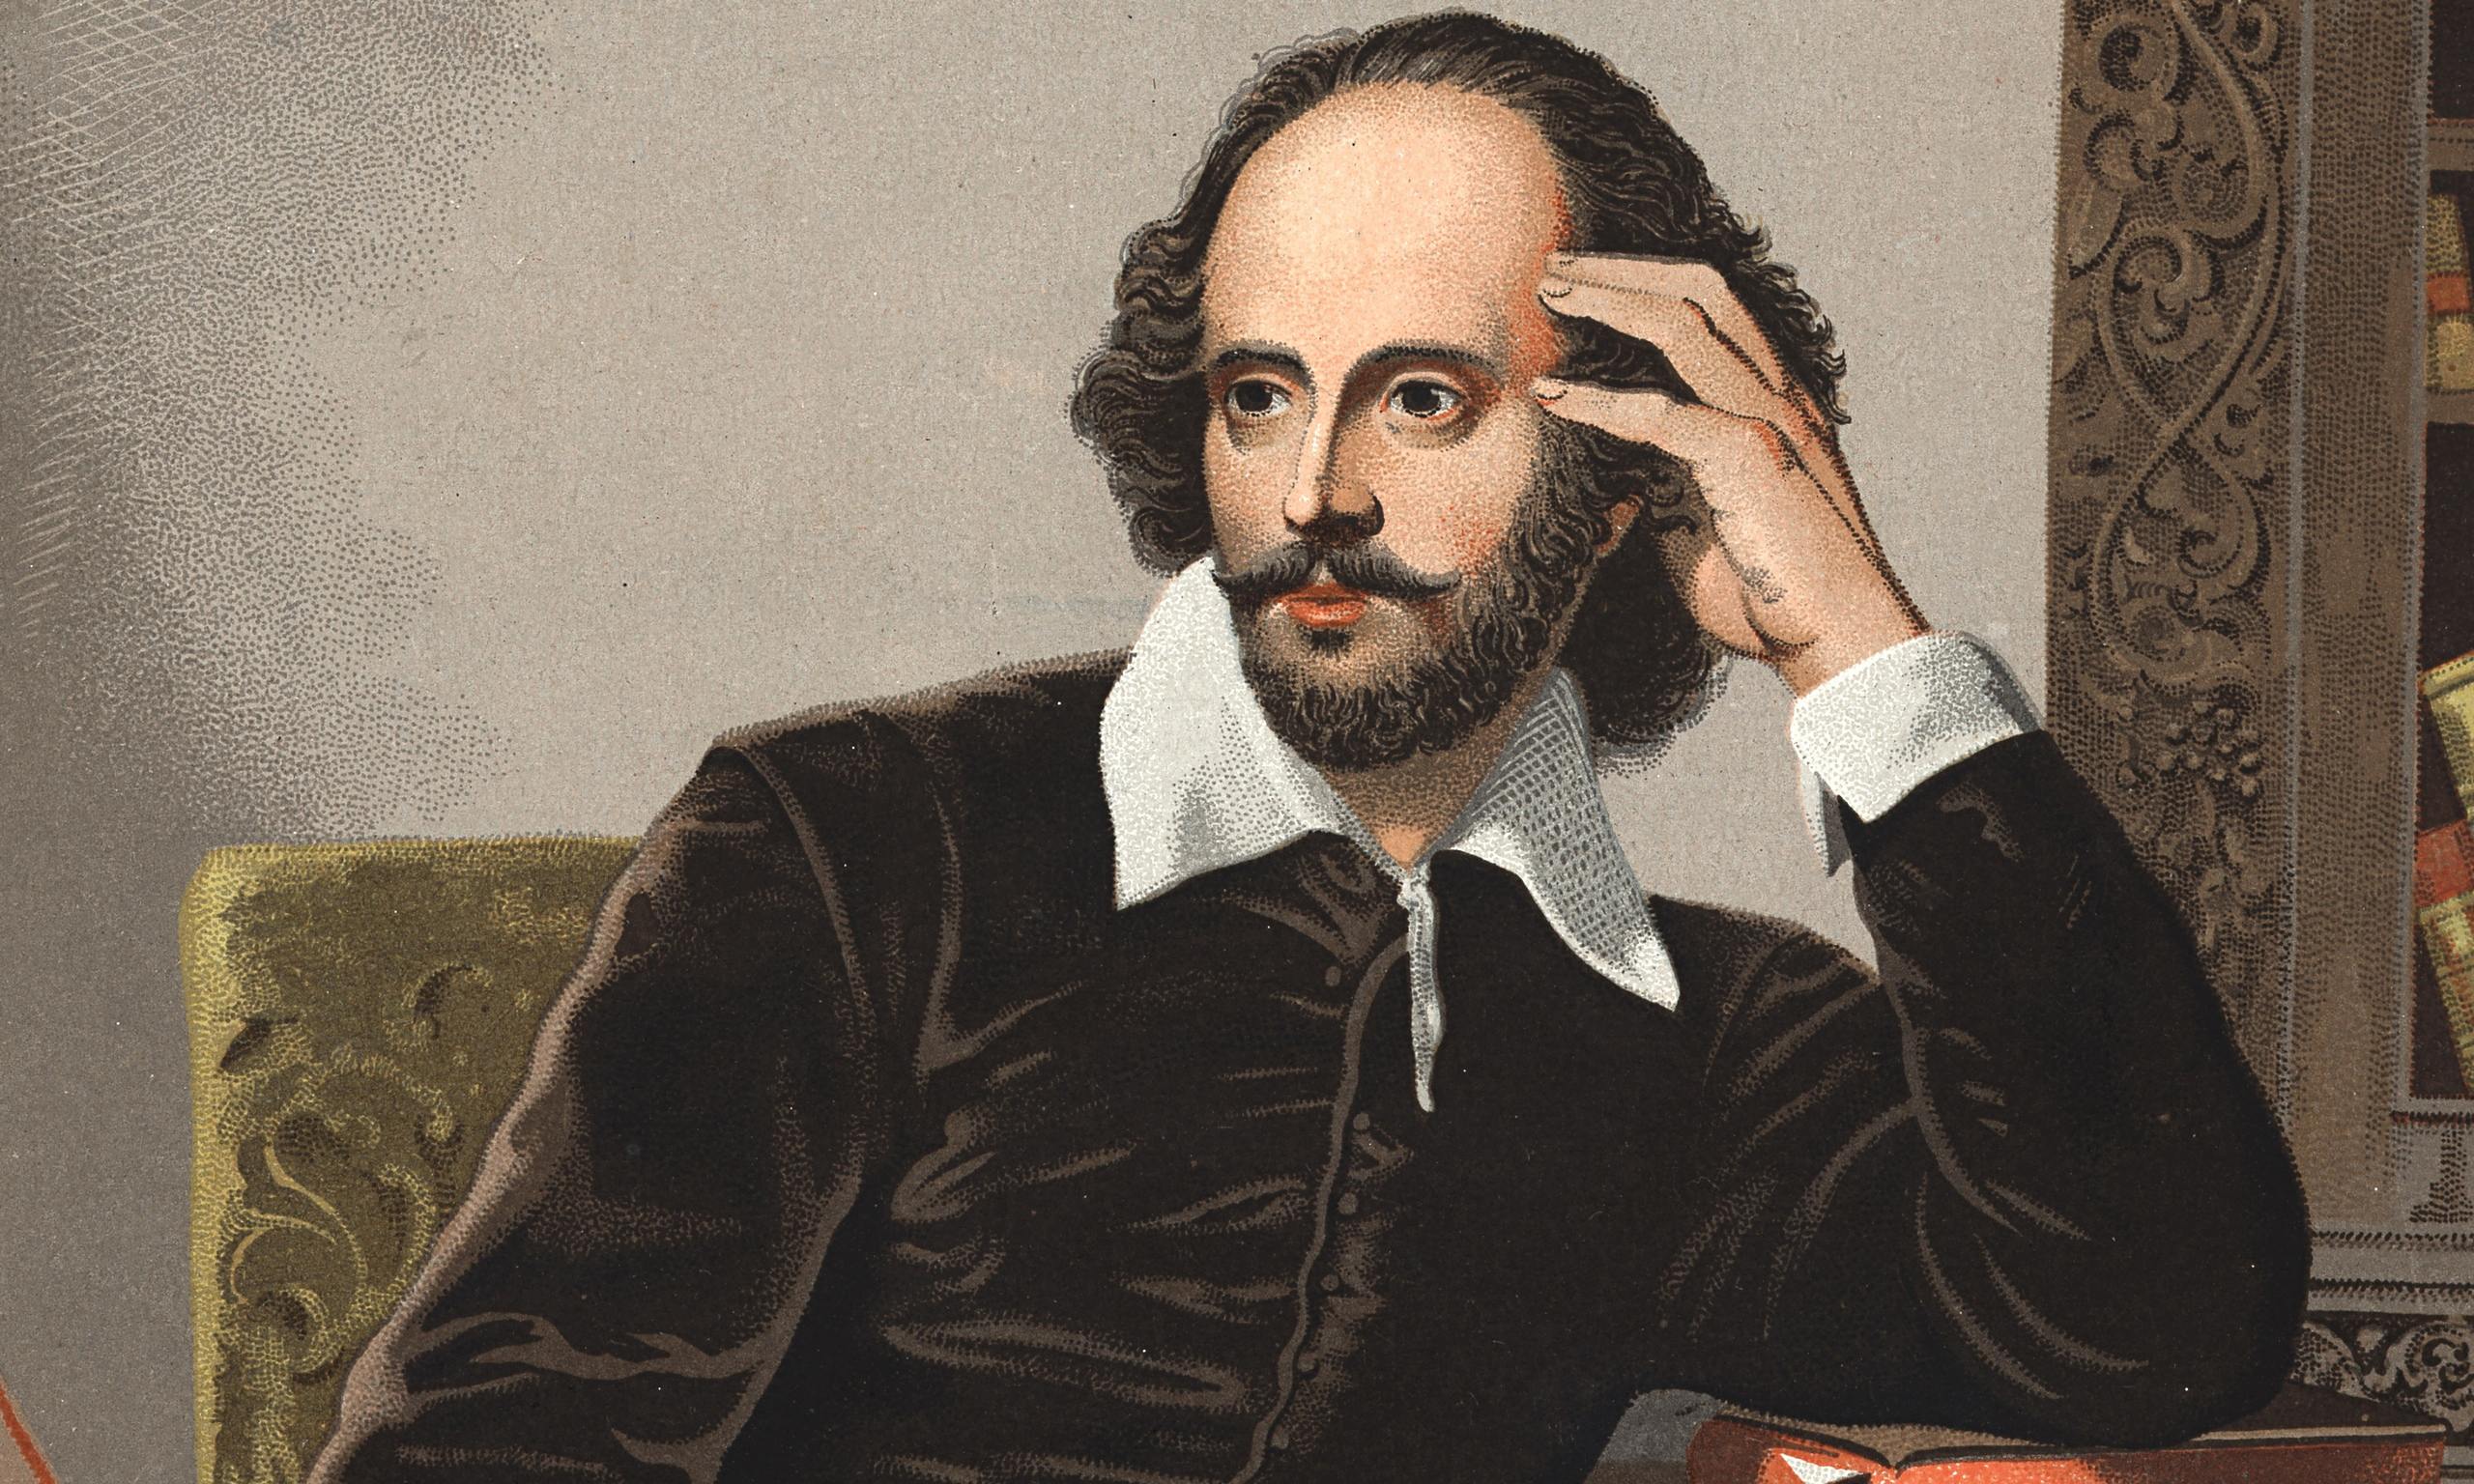 William Shakespeare Wallpapers